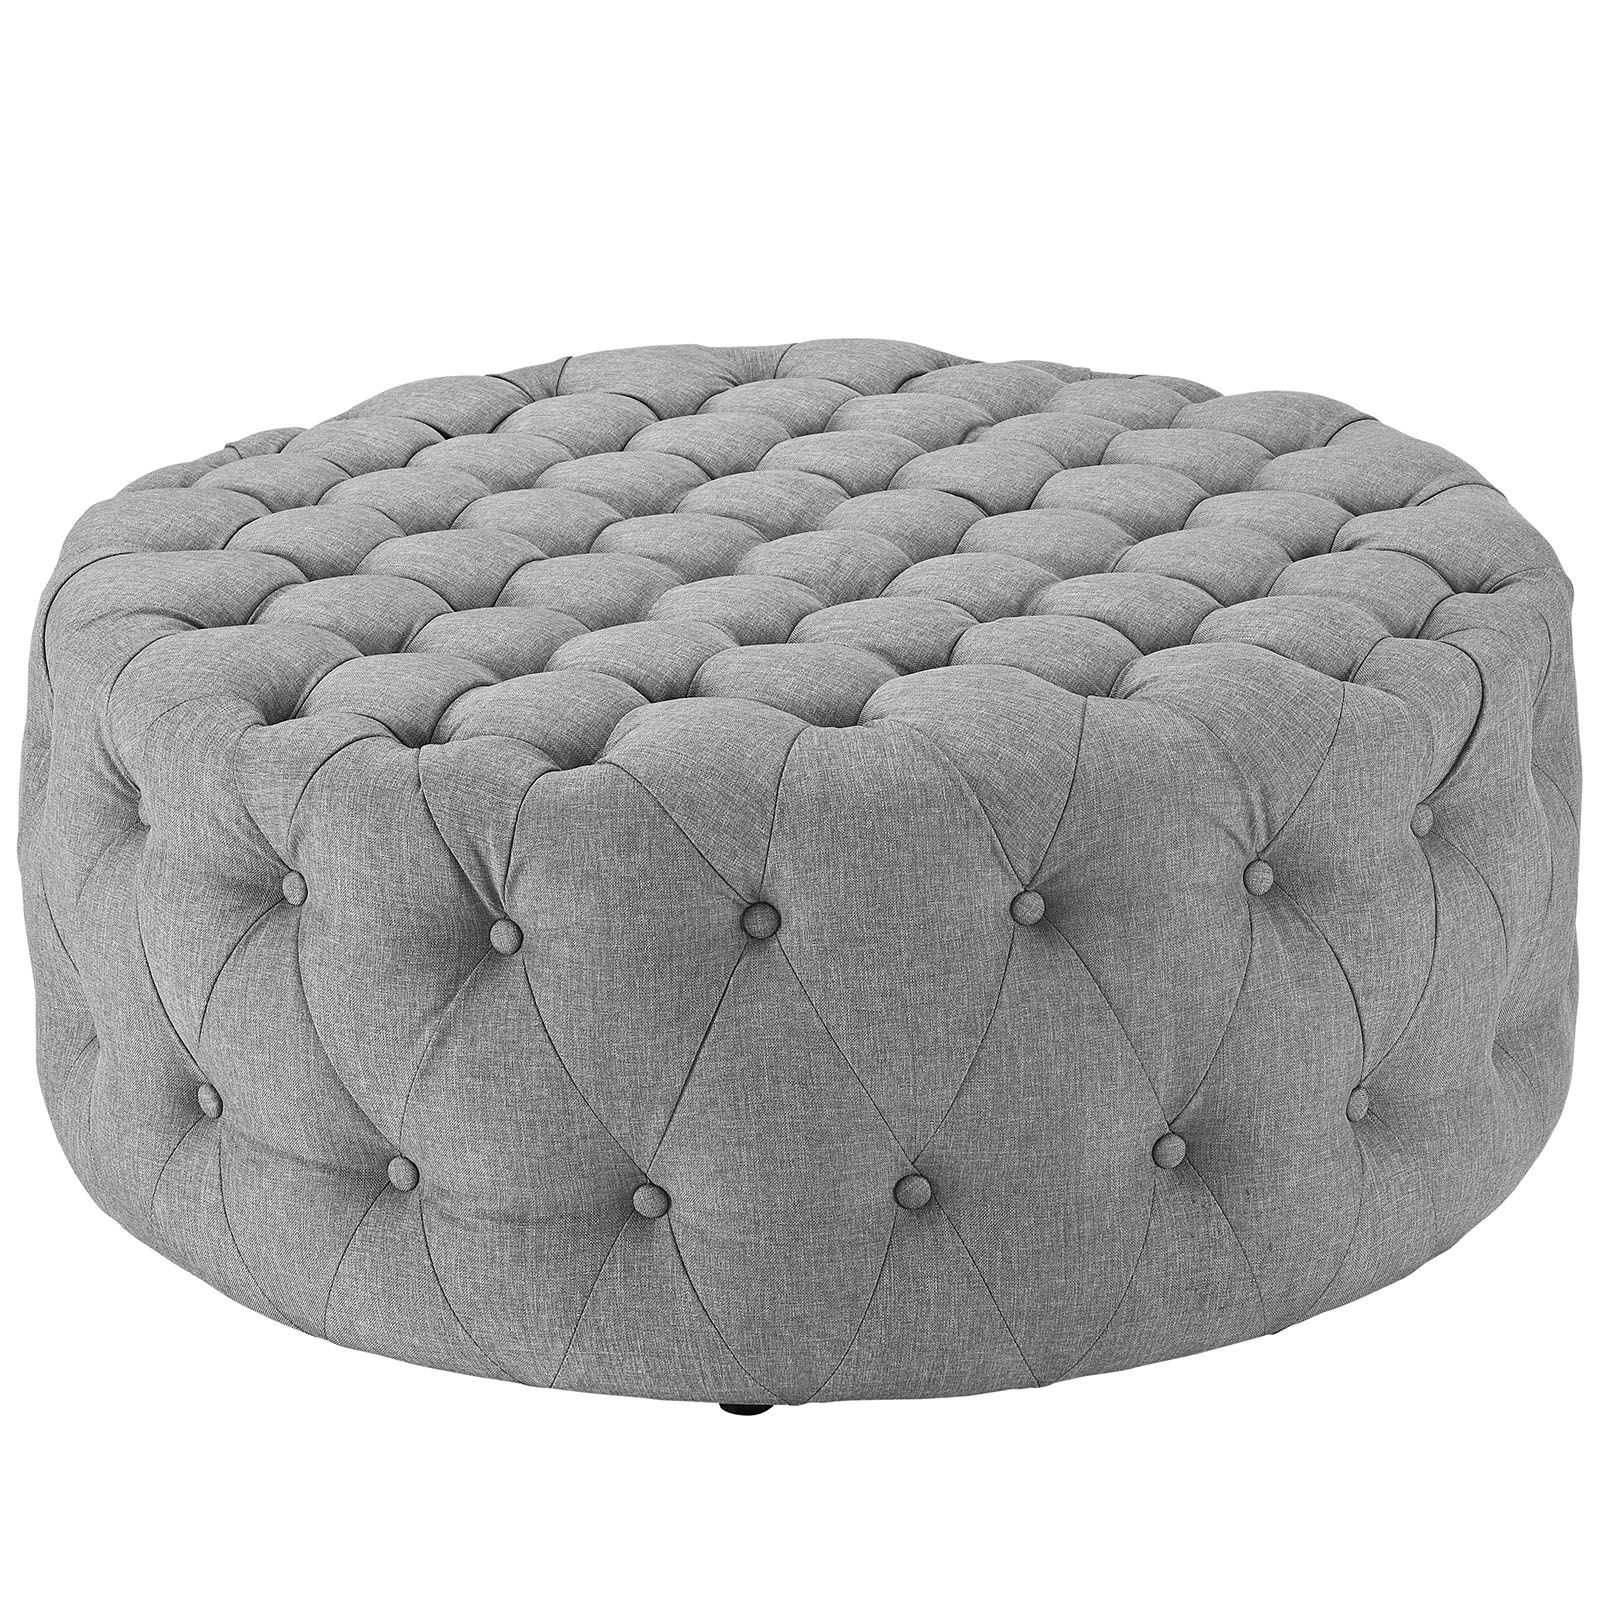 Amour Upholstered Fabric Ottoman Light Gray Regarding Most Popular Light Gray Cylinder Pouf Ottomans (View 6 of 10)